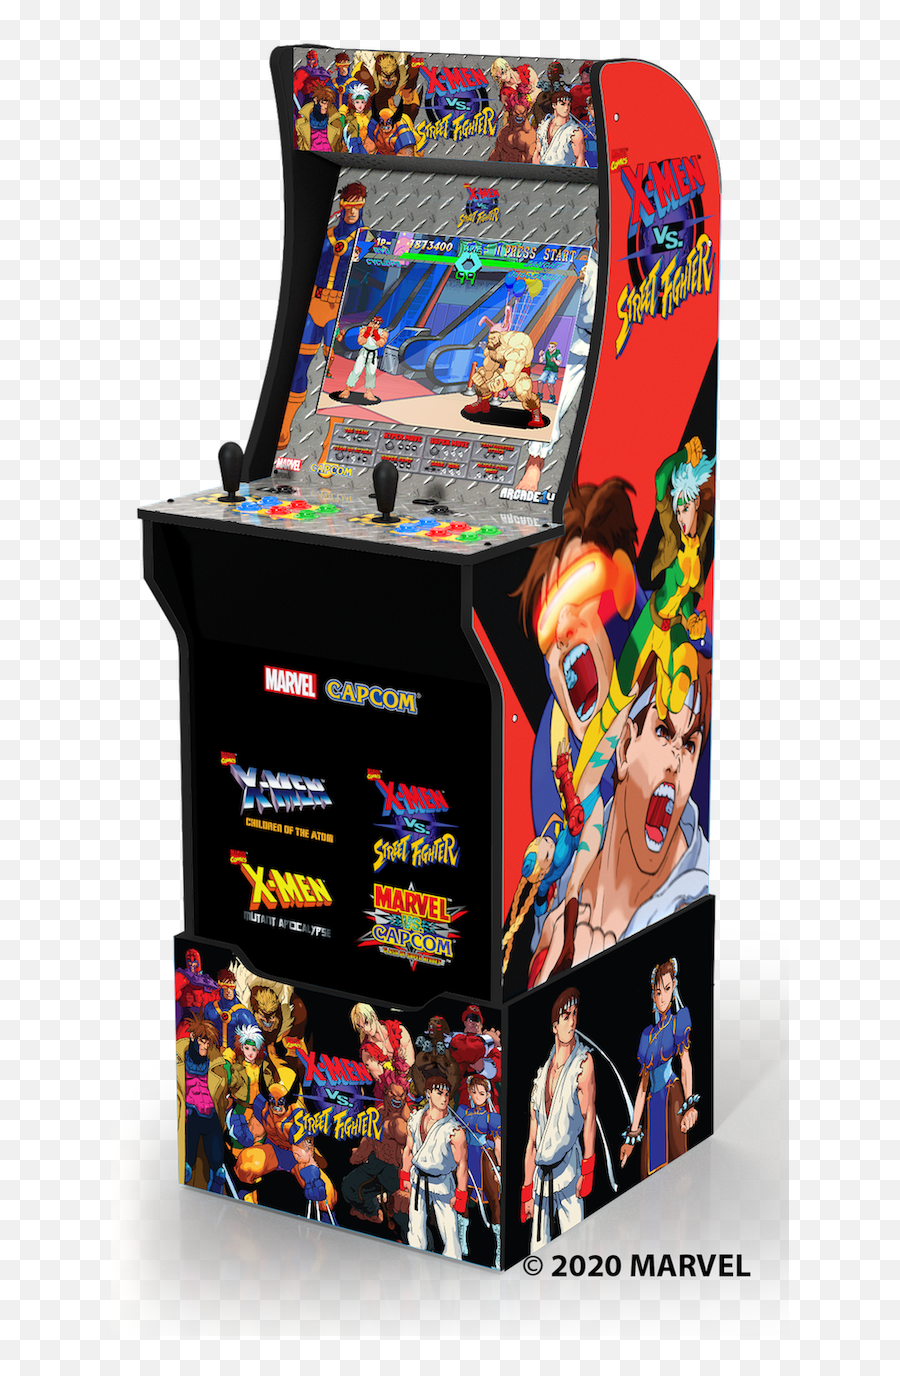 X - Men Vs Street Fighter Arcade Machine With Riser Arcade1up Walmartcom Arcade1up Xmen Vs Street Fighter Png,Blue Marvel Vs Icon